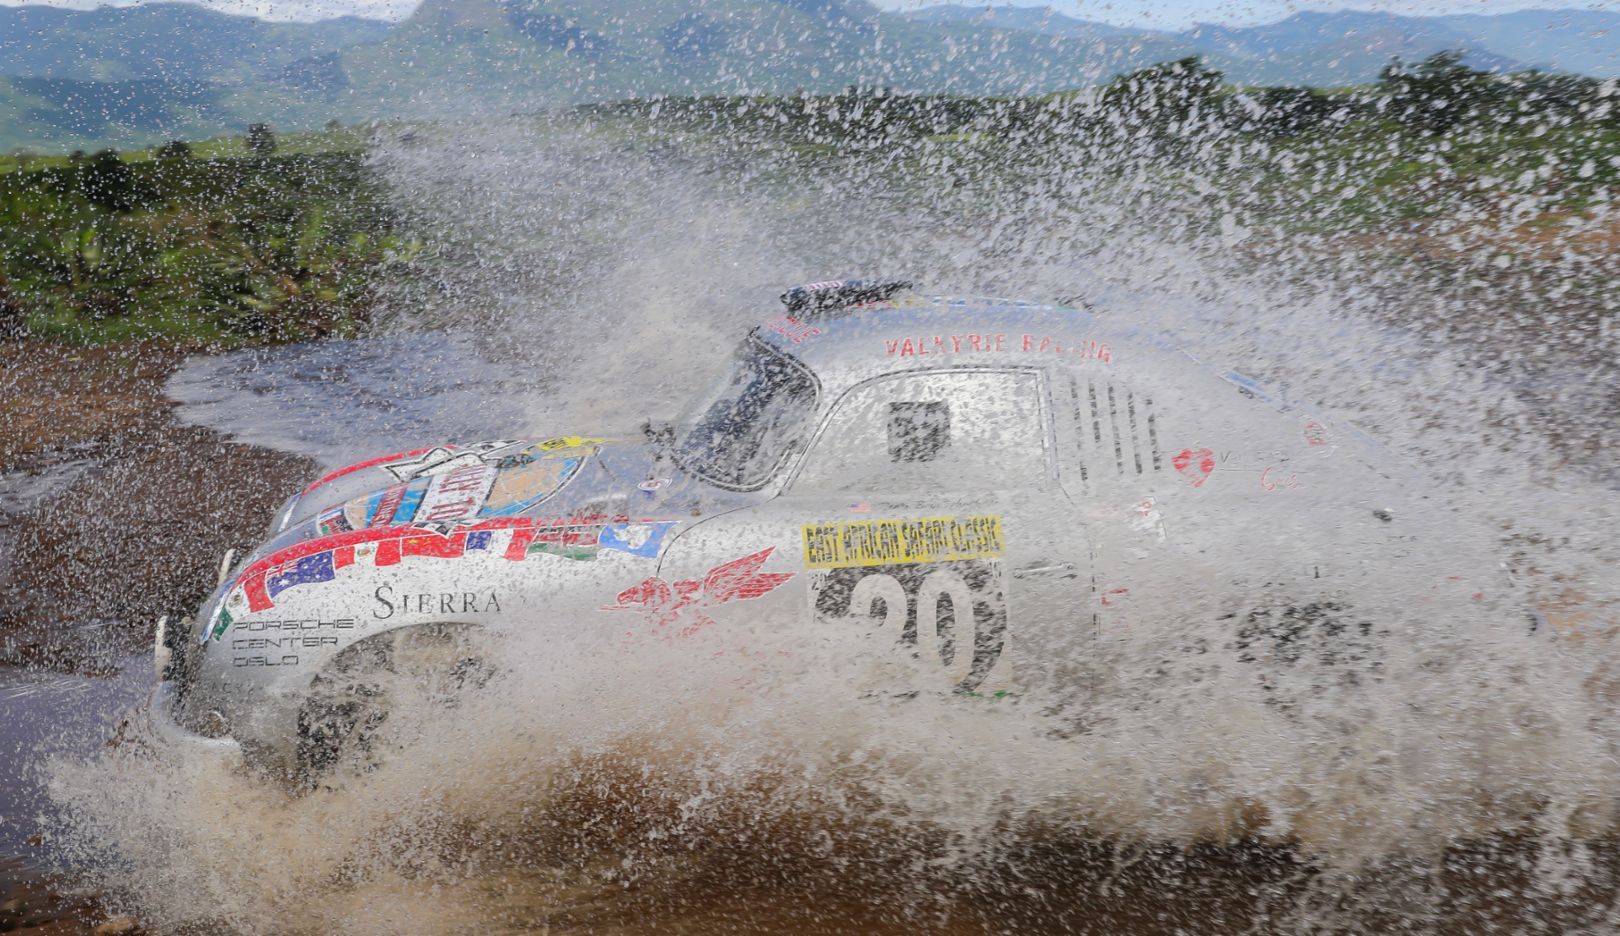 The weather in Kenya and Tanzania had a strong influence on the East African Safari Classic Rally, with heavy rainstorms.